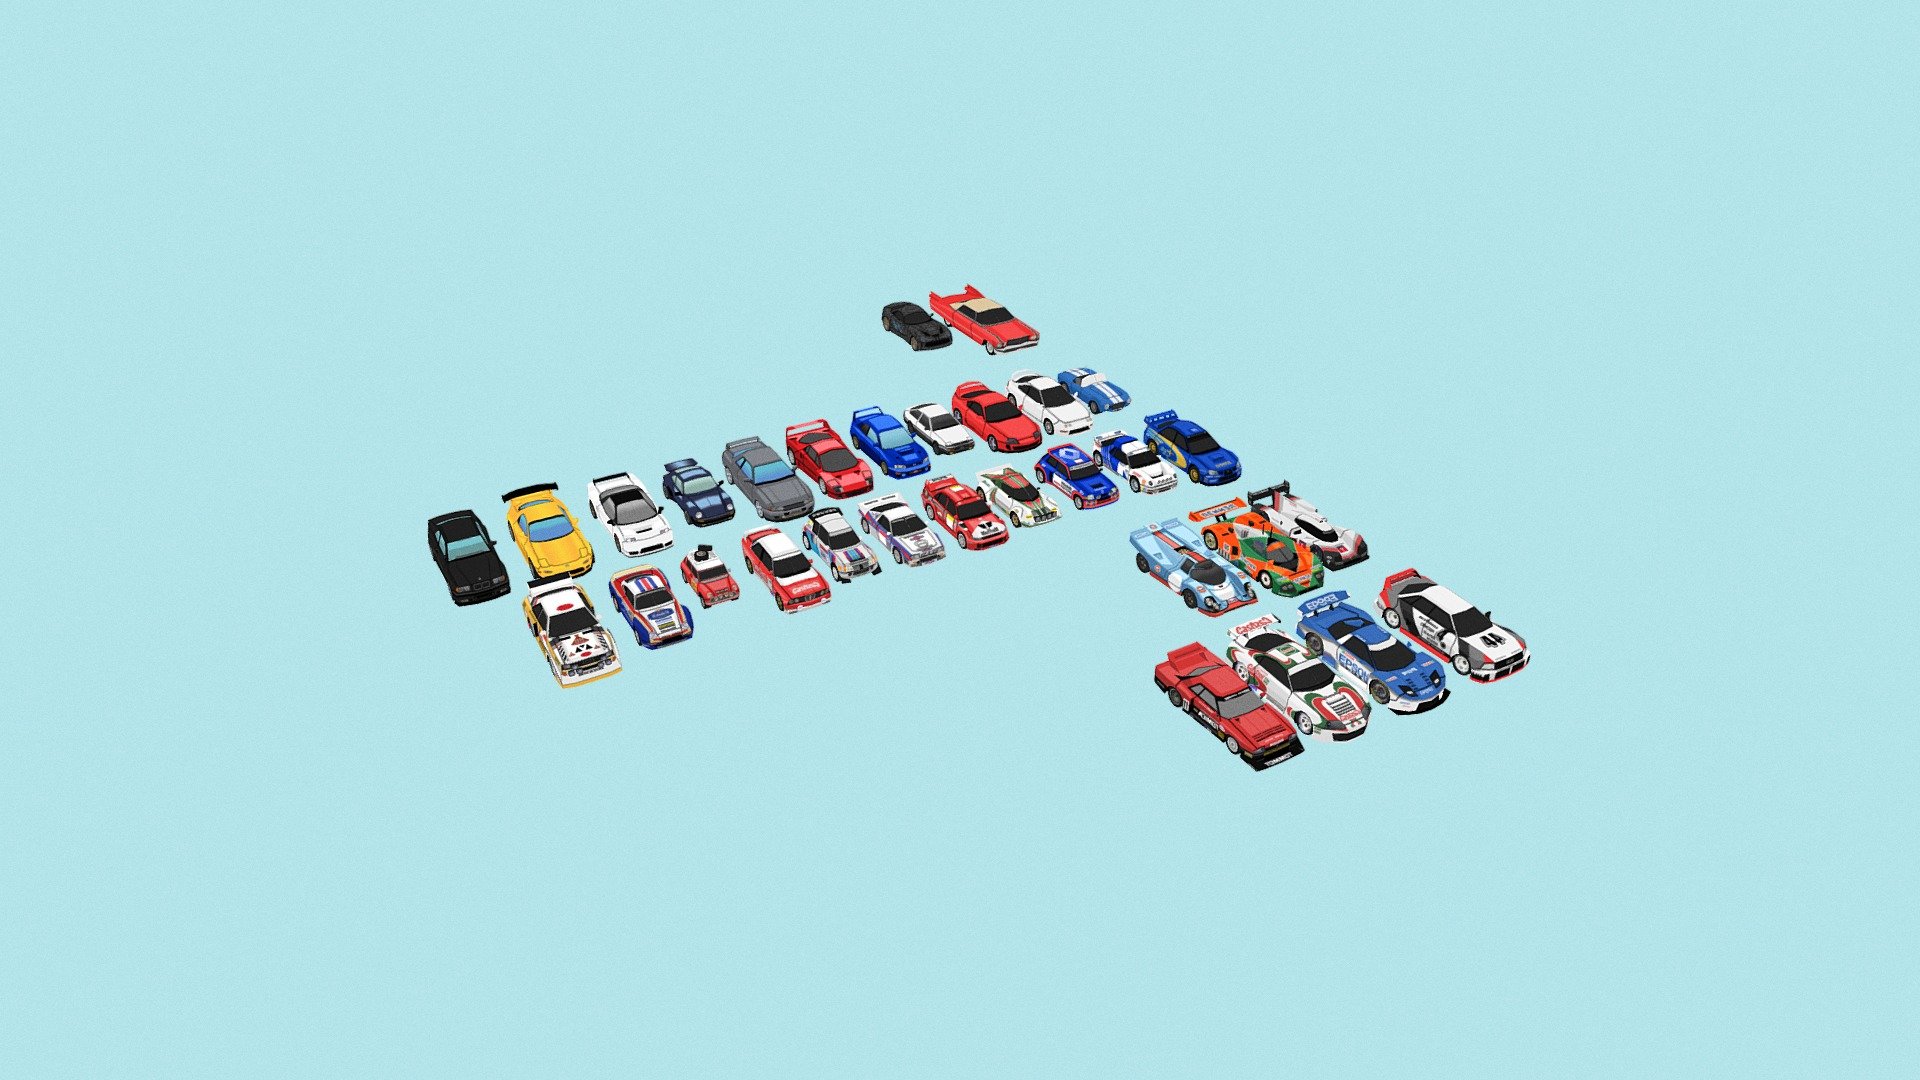 3d low poly cars pack.
-each model has between 100-500 tris
-4 gt cars
-3 lemans cars
-11 rally cars
-11 road cars
-2 special cars
I make these on my free time since they are fairly easy so I'll keep updating the pack - 31 cars low poly pack - 3D model by Luís Marques (@LuisMarques) 3d model